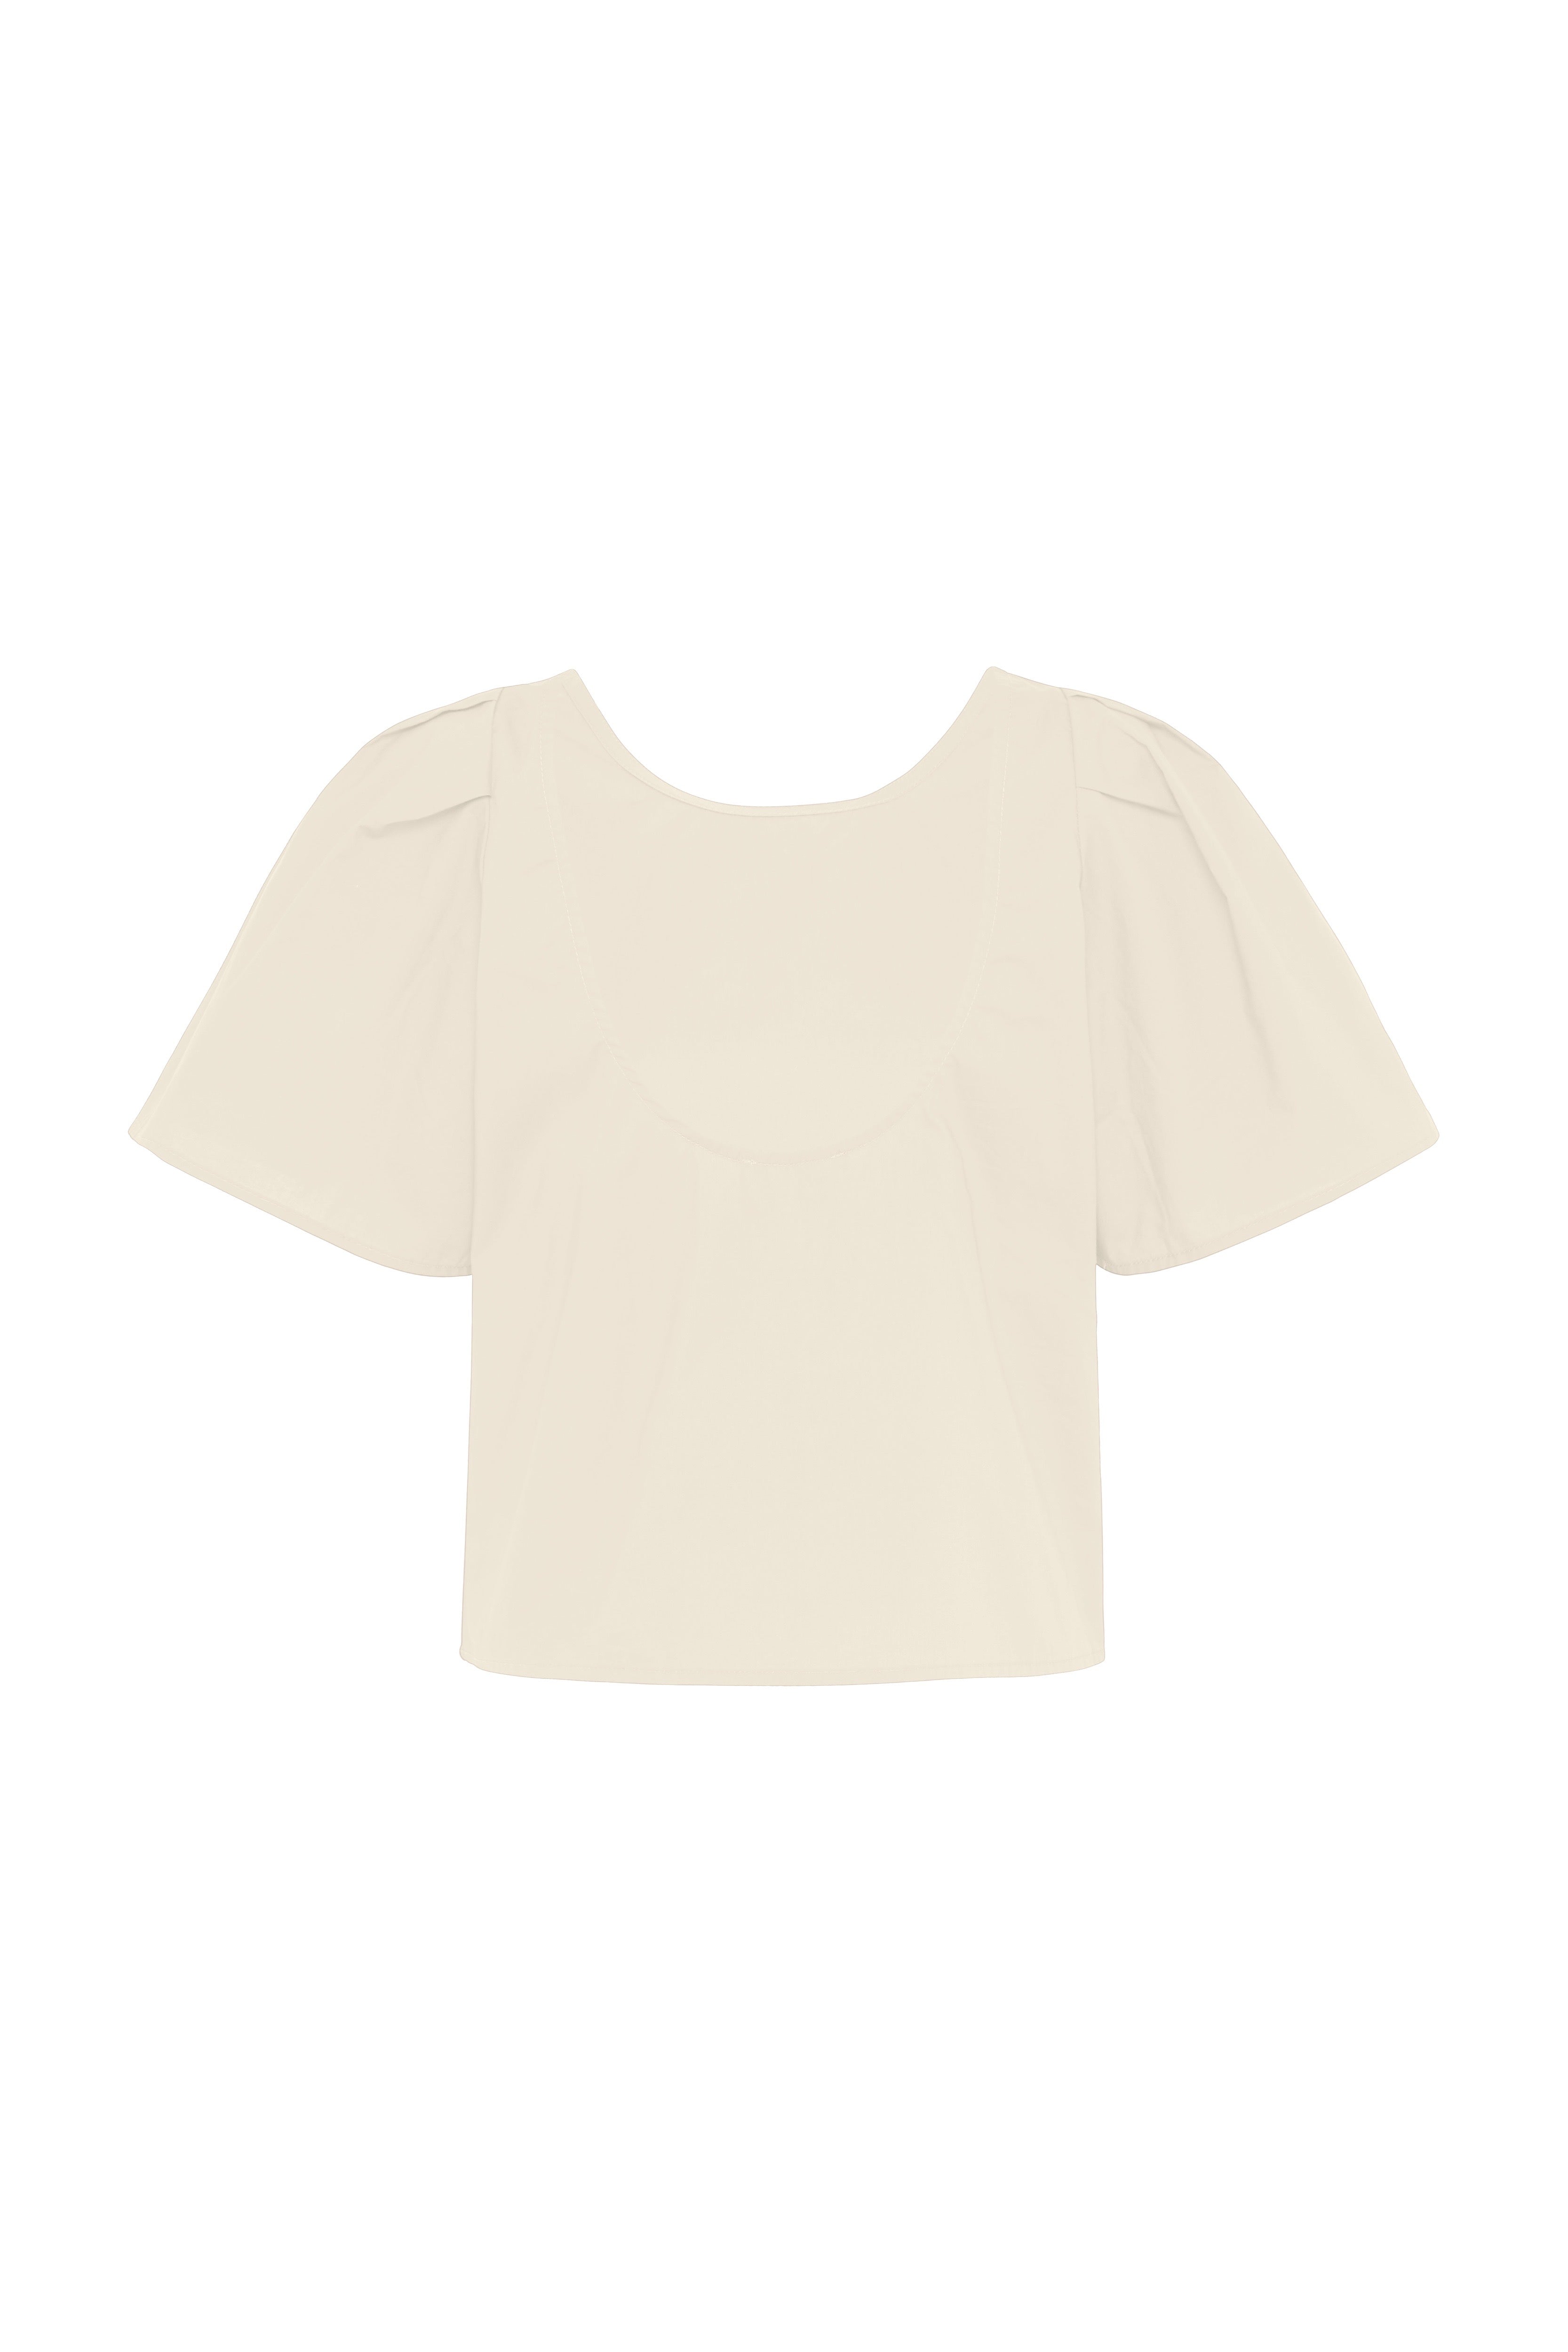 Bird and Knoll - Tosca Top, Coconut - Worn For Good